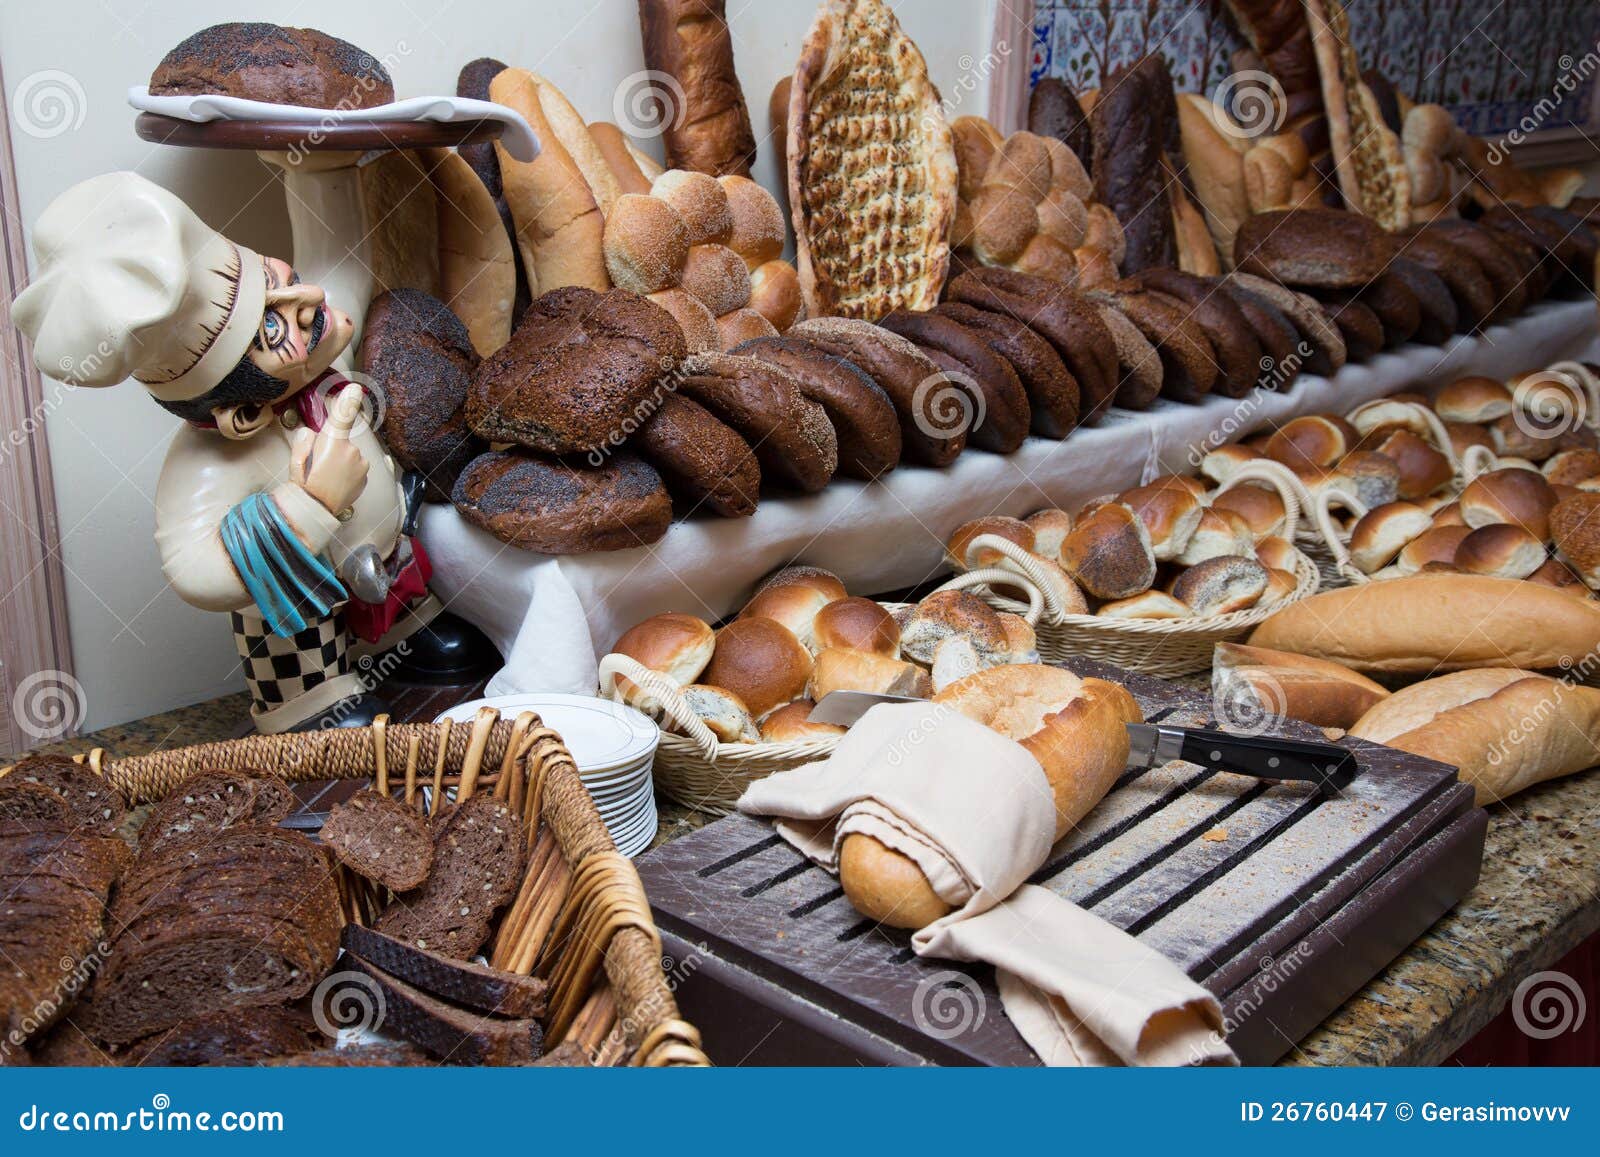 Bakery Product Assortment Stock Image Image Of Brown 26760447